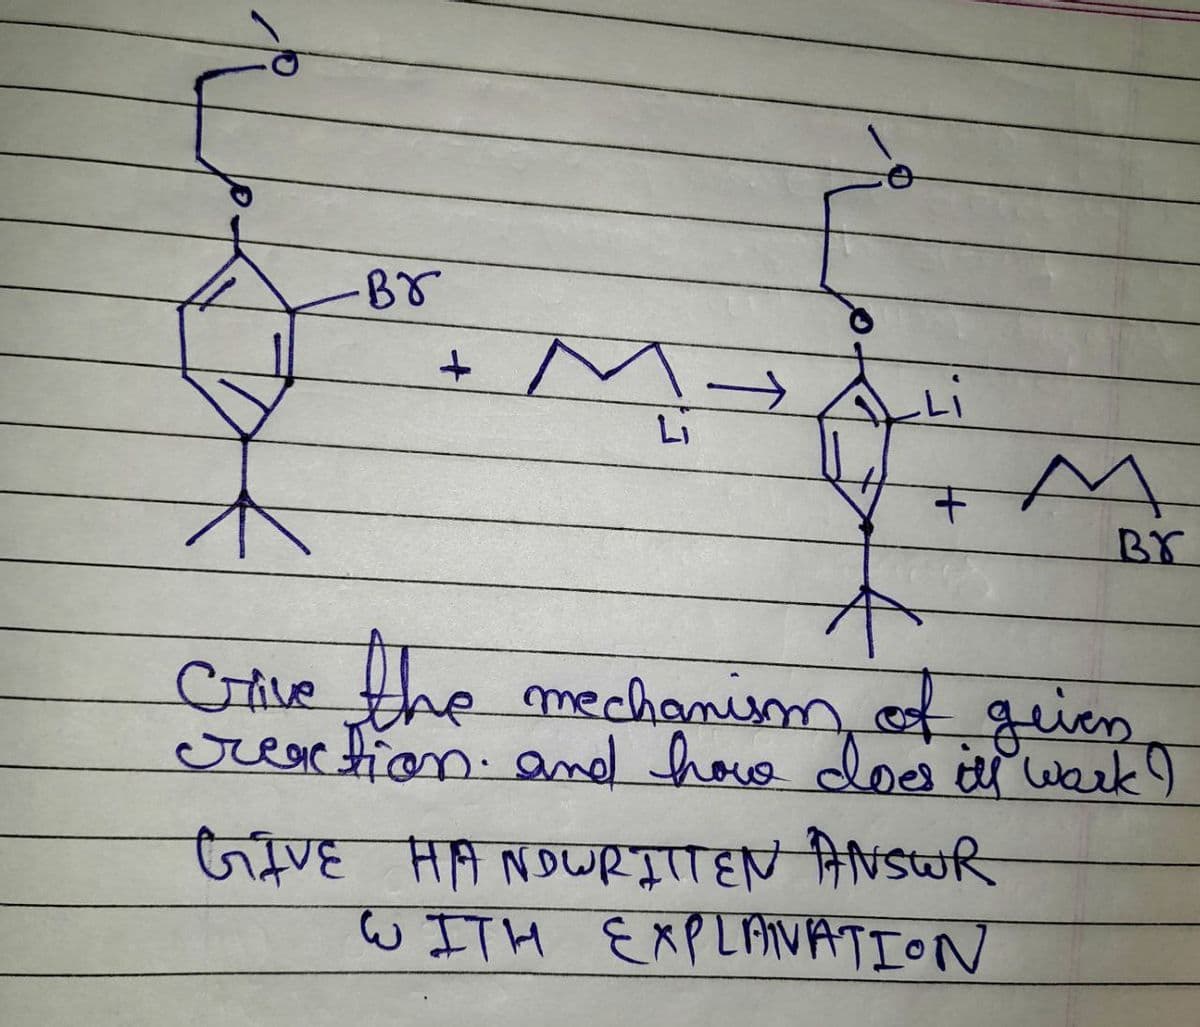 -Br
+
Li
+
M
Br
A
Crive the mechanism of geven
reaction and how does ill work I
GIVE HANDWRITTEN ANSWR
WITH EXPLANATION